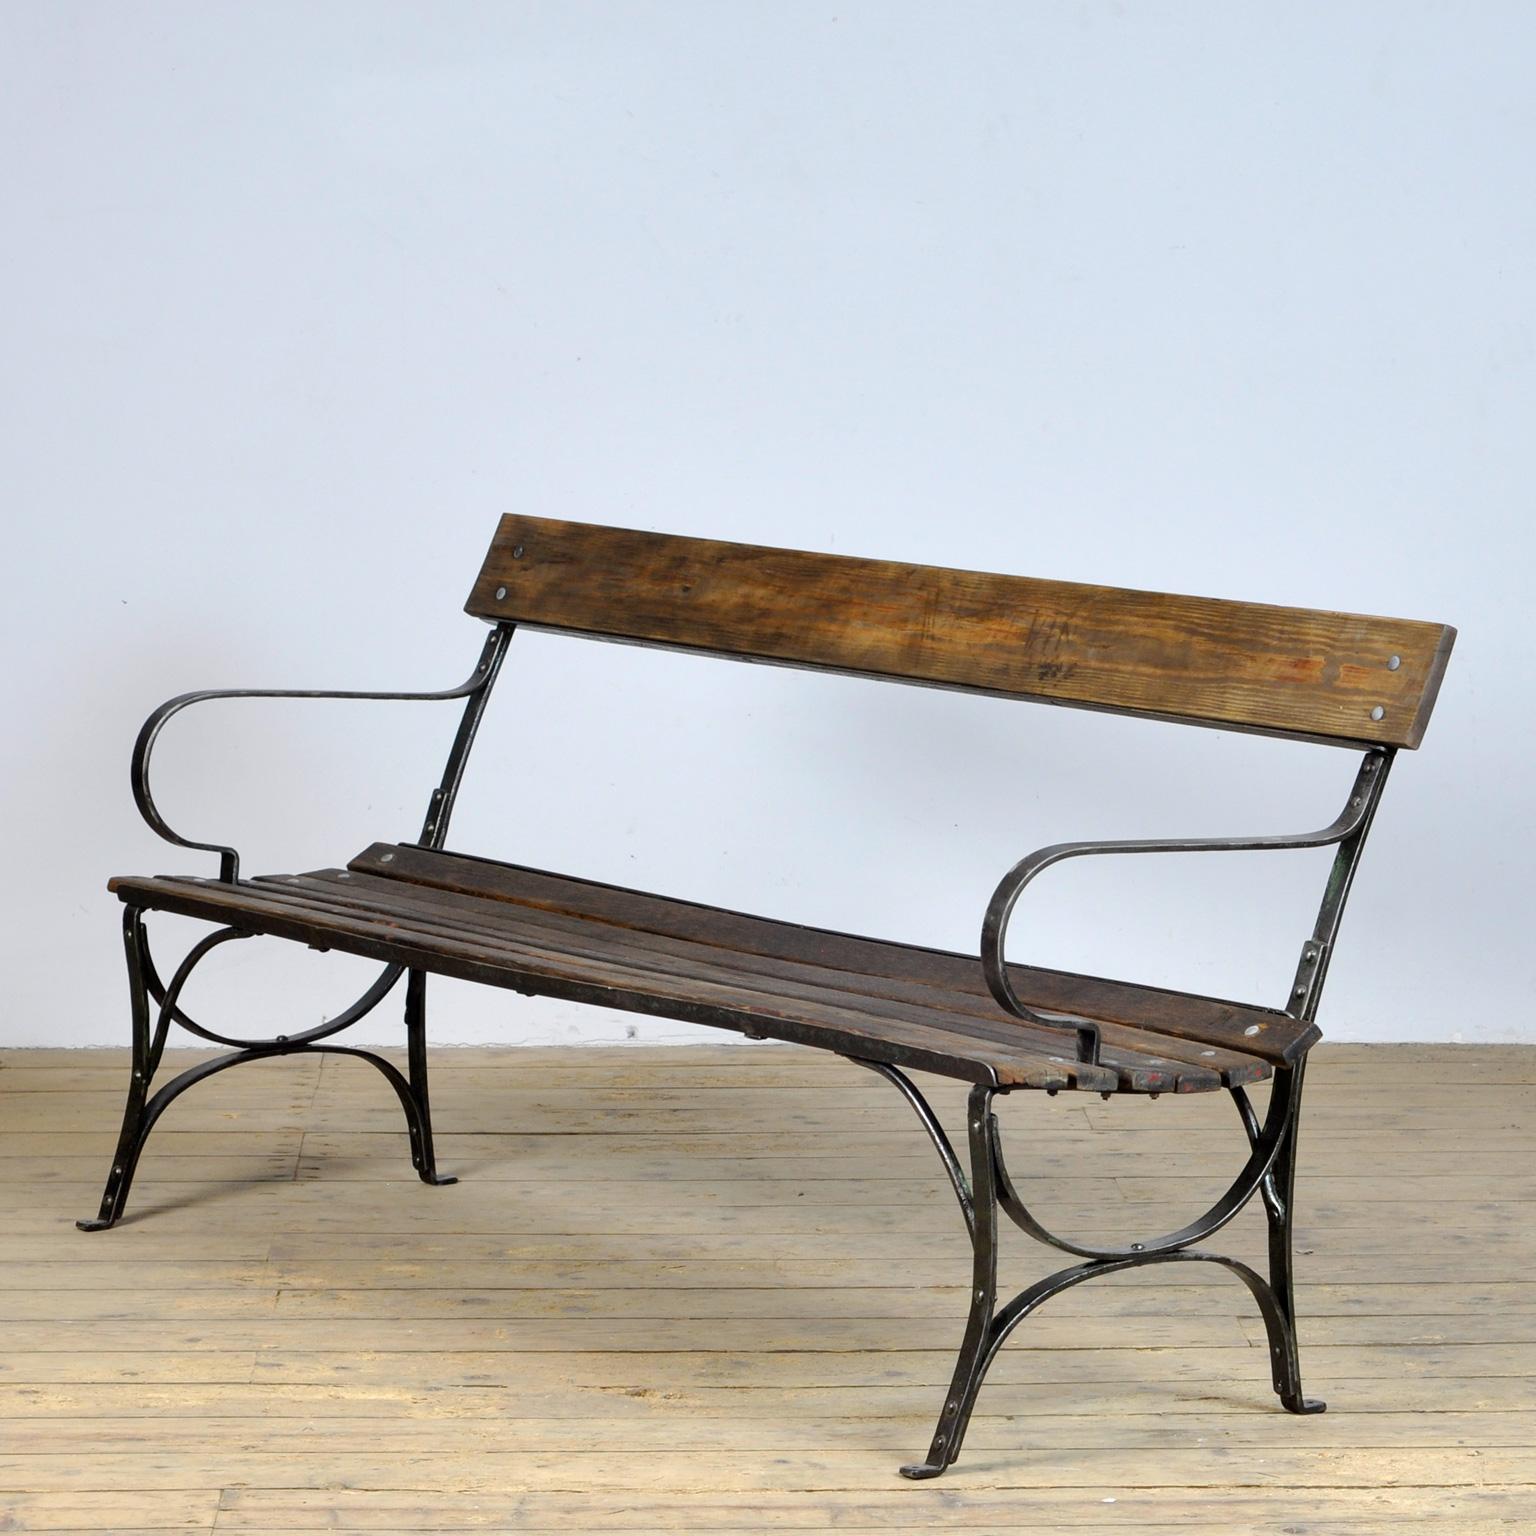 French Riveted Iron Garden Bench, 1920s